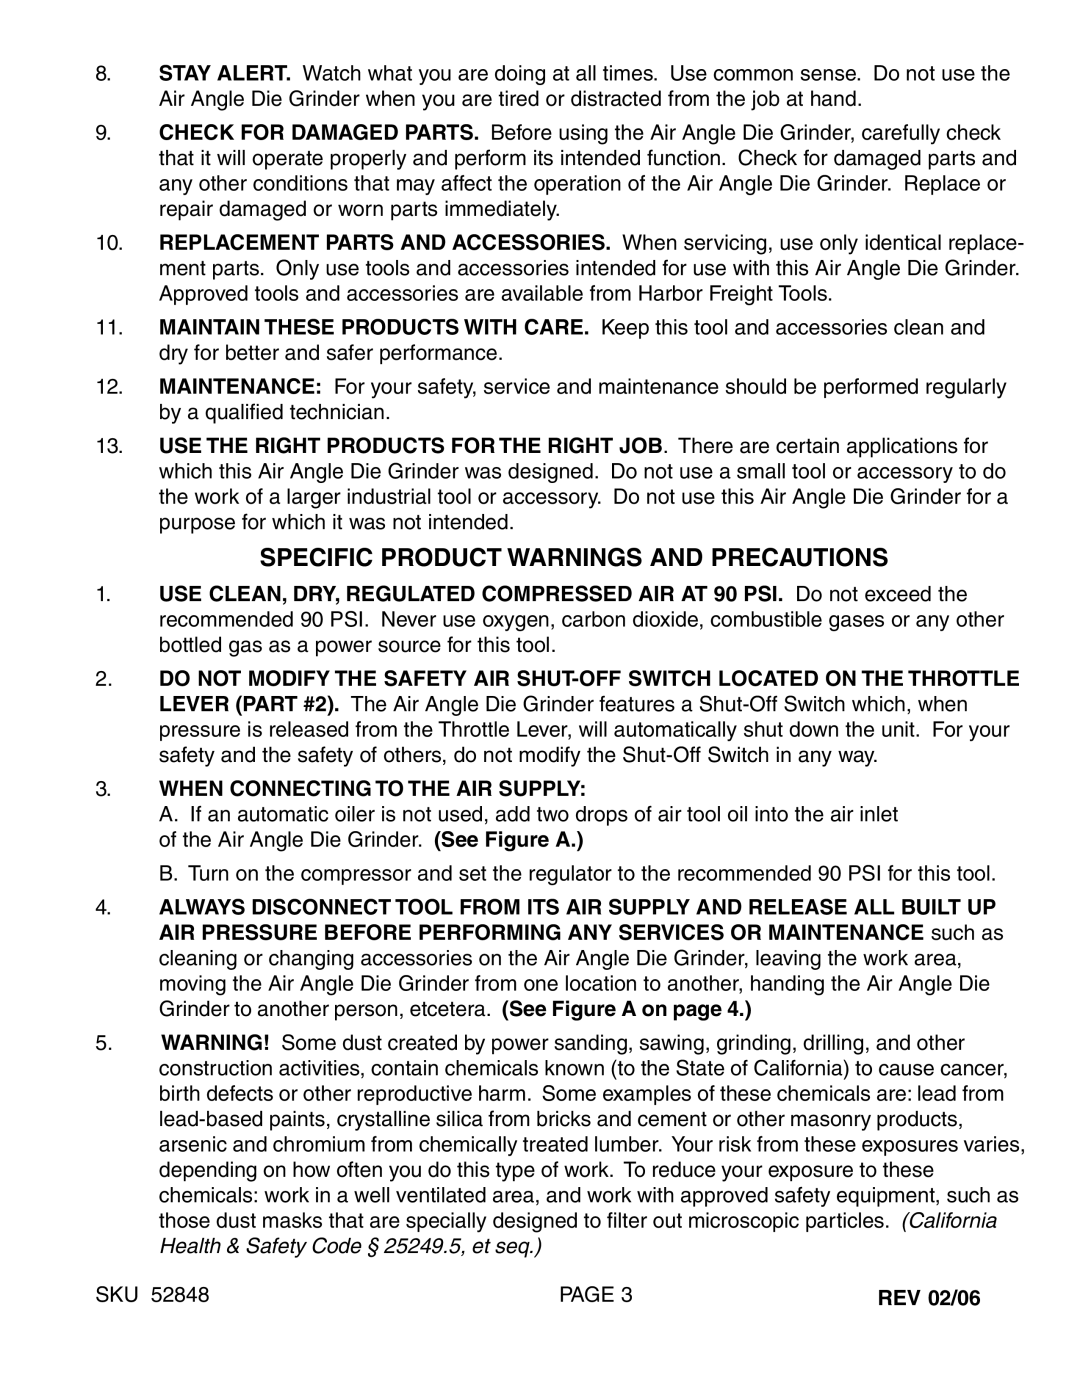 Harbor Freight Tools 52848 manual Specific Product Warnings and Precautions, When Connecting to the AIR Supply 